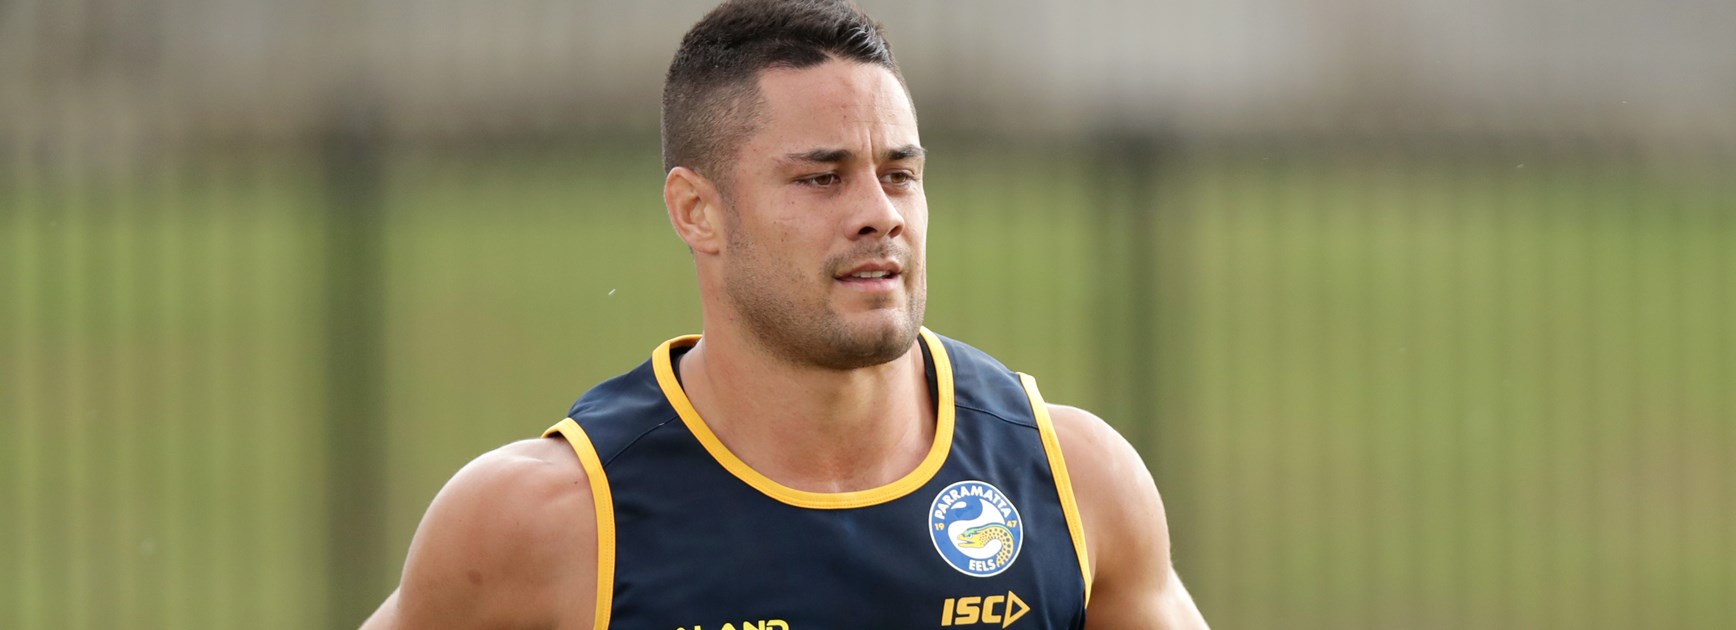 Jarryd Hayne on his first day back at training with the Parramatta Eels.